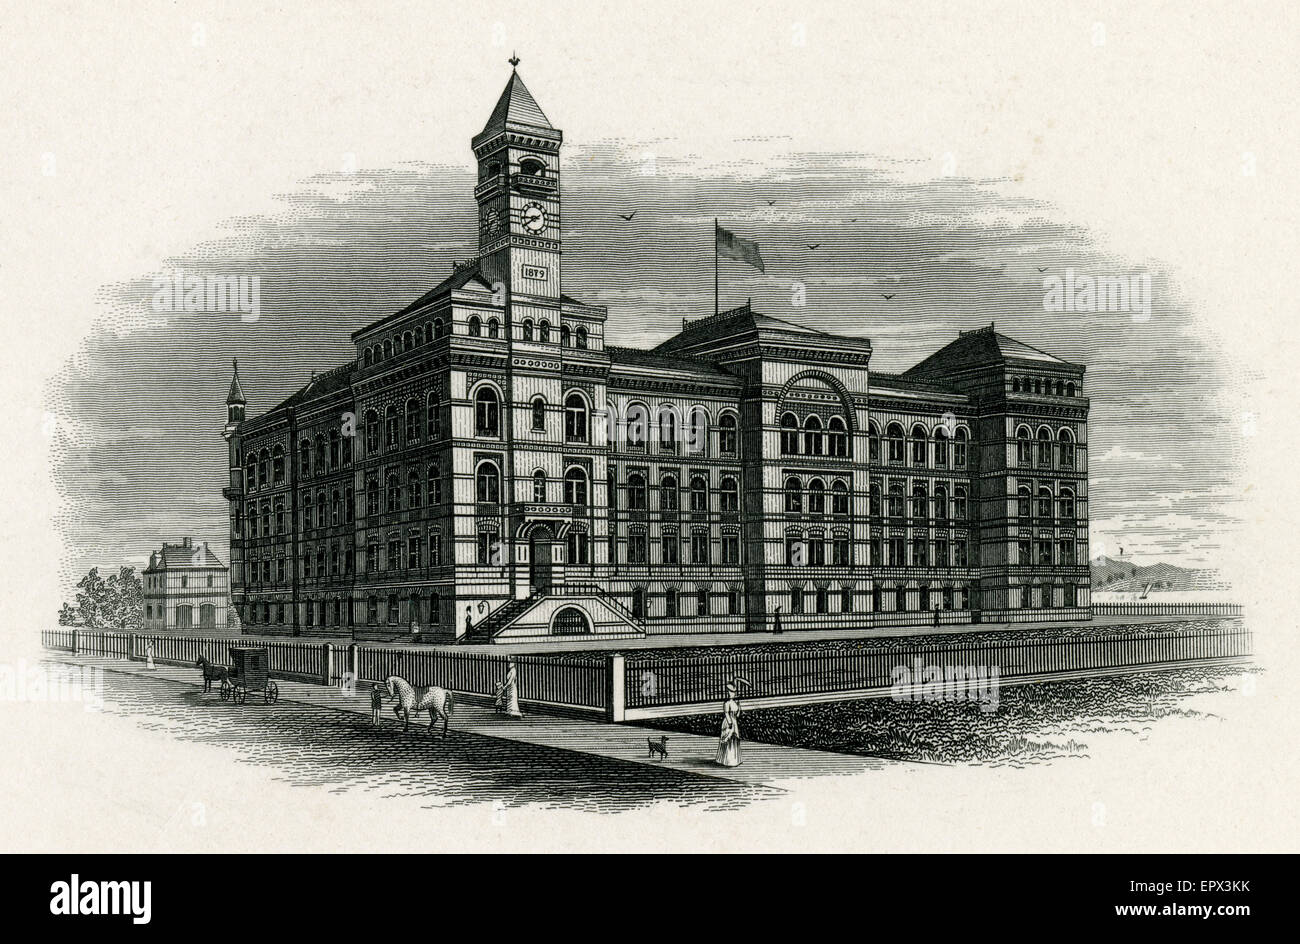 Antique c1880 steel engraving of The Bureau of Engraving and Printing in Washington, D.C. It opened in 1880 and was designed by James G. Hill. The BEP is a government agency within the United States Department of the Treasury that designs and produces a variety of security products for the United States government, most notable of which is Federal Reserve Notes (paper money) for the Federal Reserve. Stock Photo